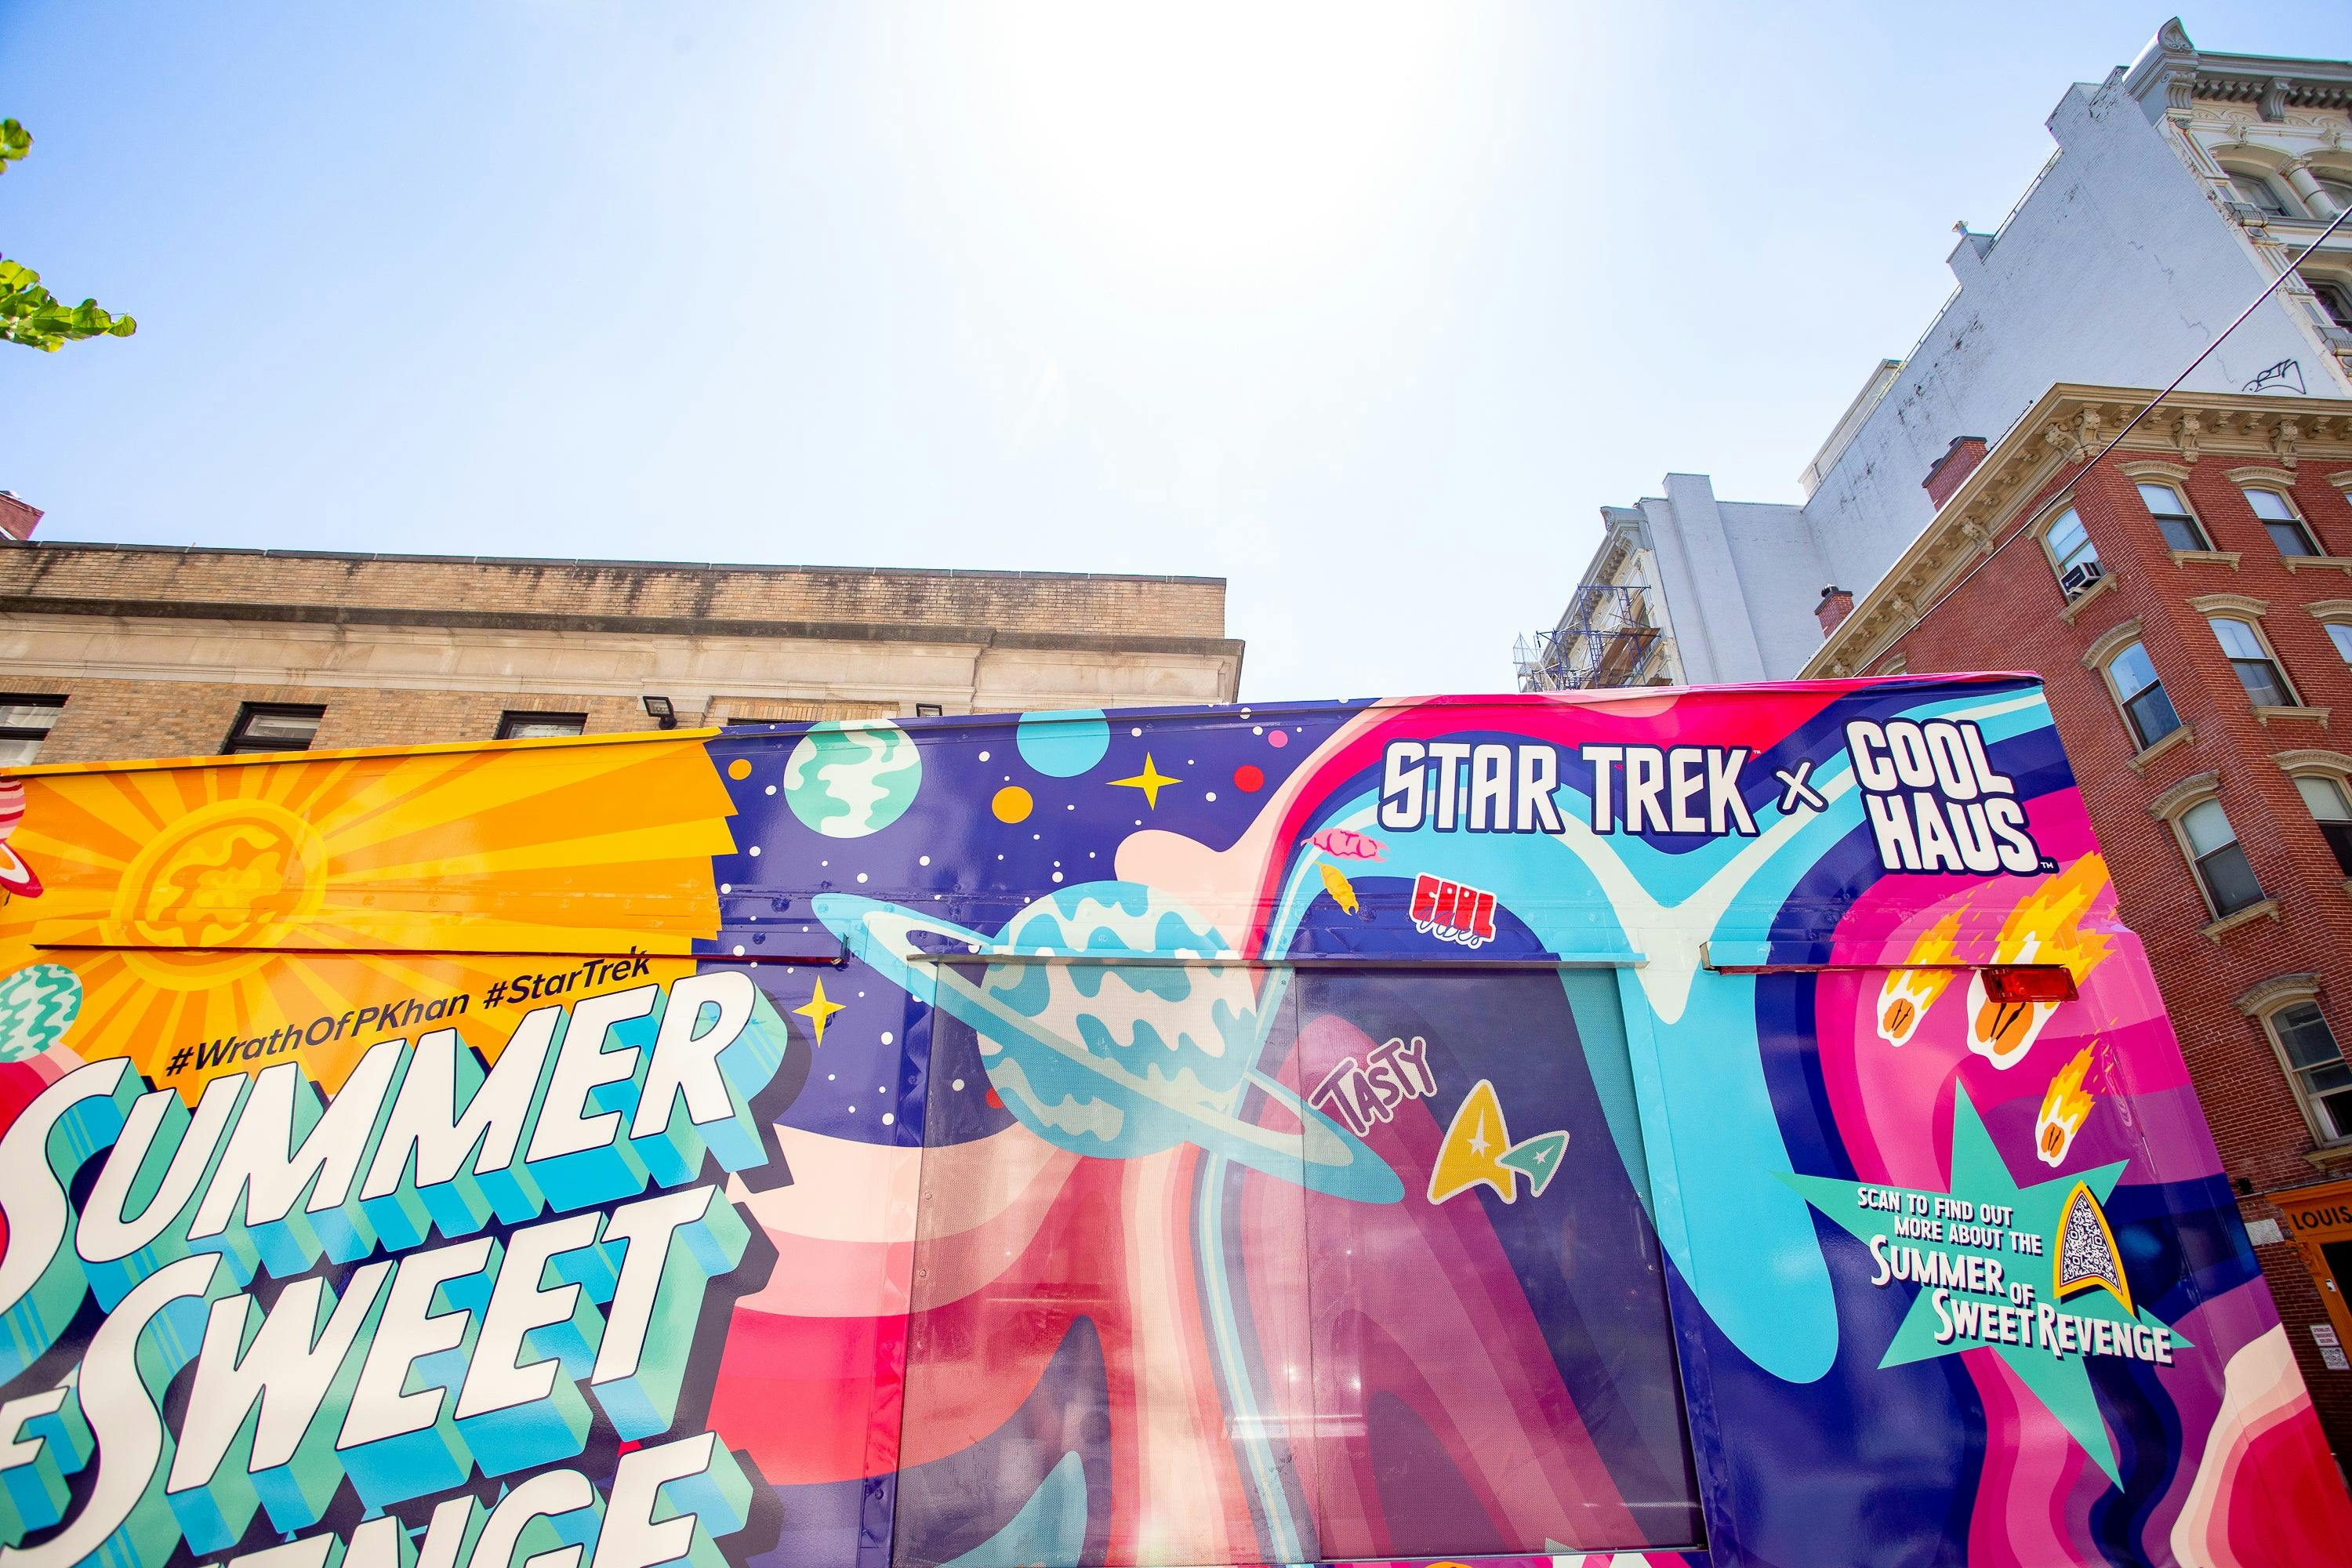 Blue skies and sunshine are visible over the top of the brightly colored ice cream truck.